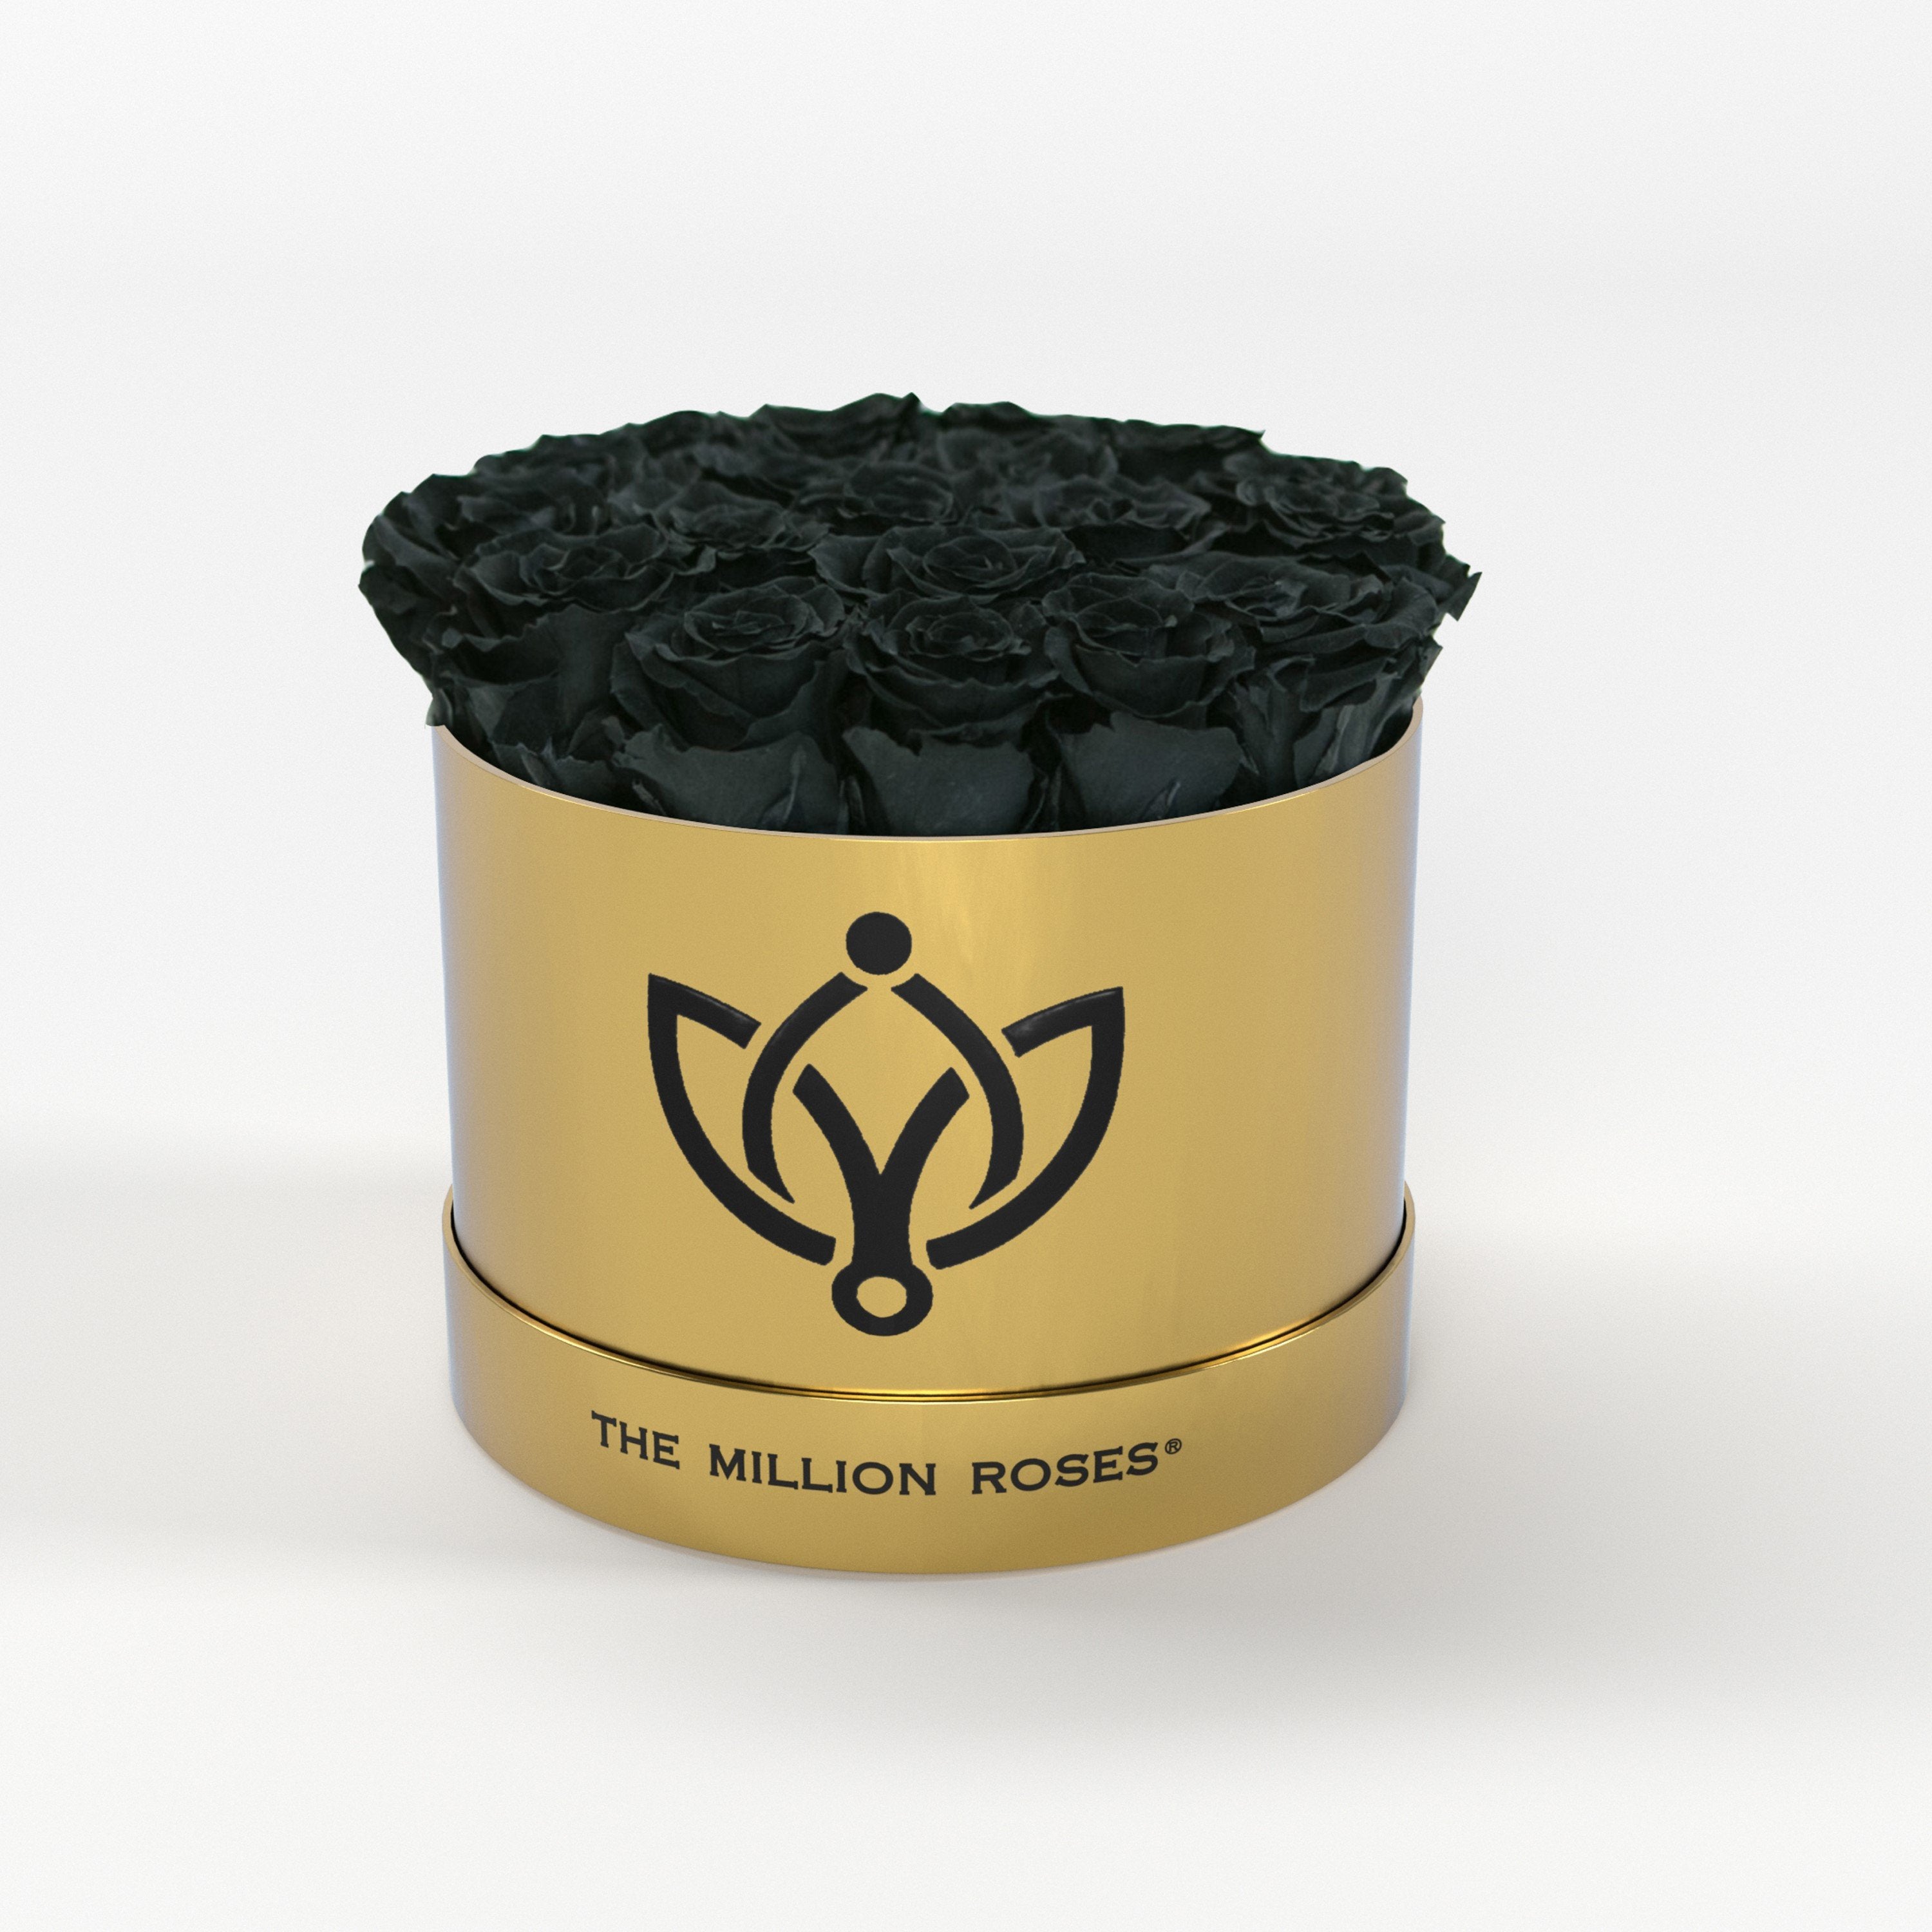 Gold - Classic Box with Black Roses